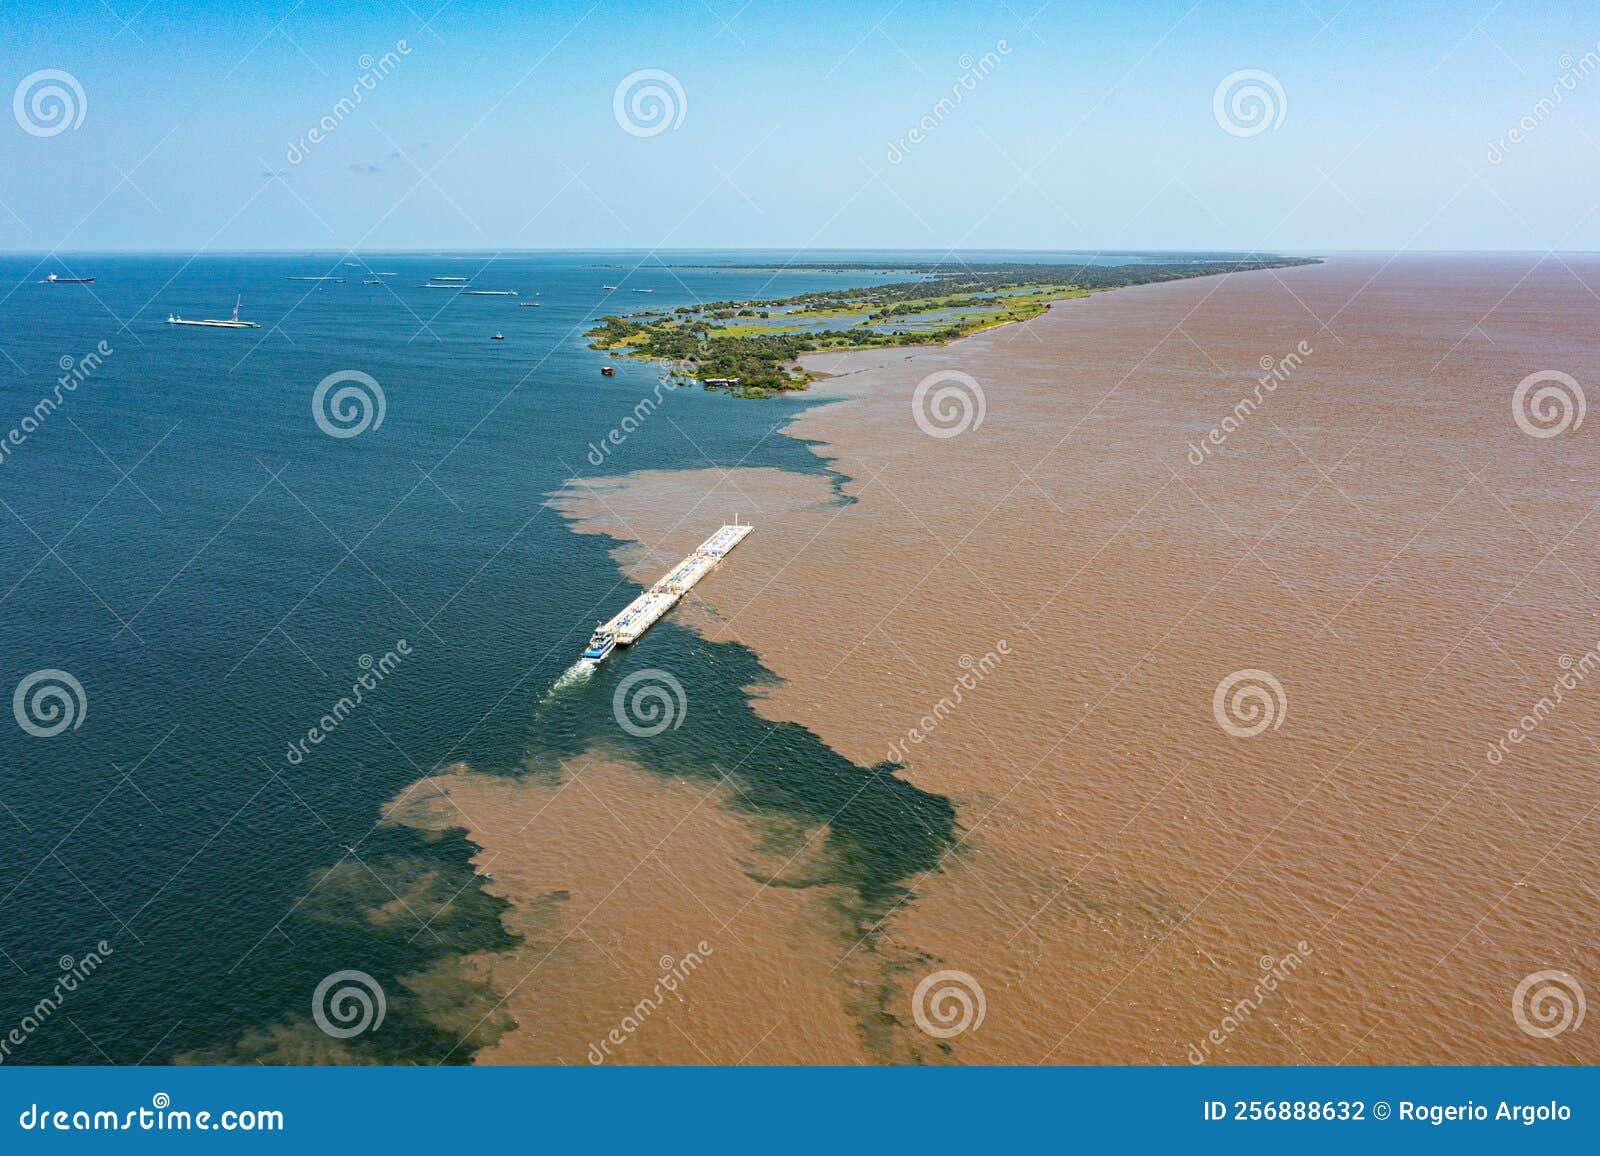 aerial photo of the meeting of the waters of the amazon rivers with the tapajÃÂ³s river in santarÃÂ©m, parÃÂ¡, brazil.